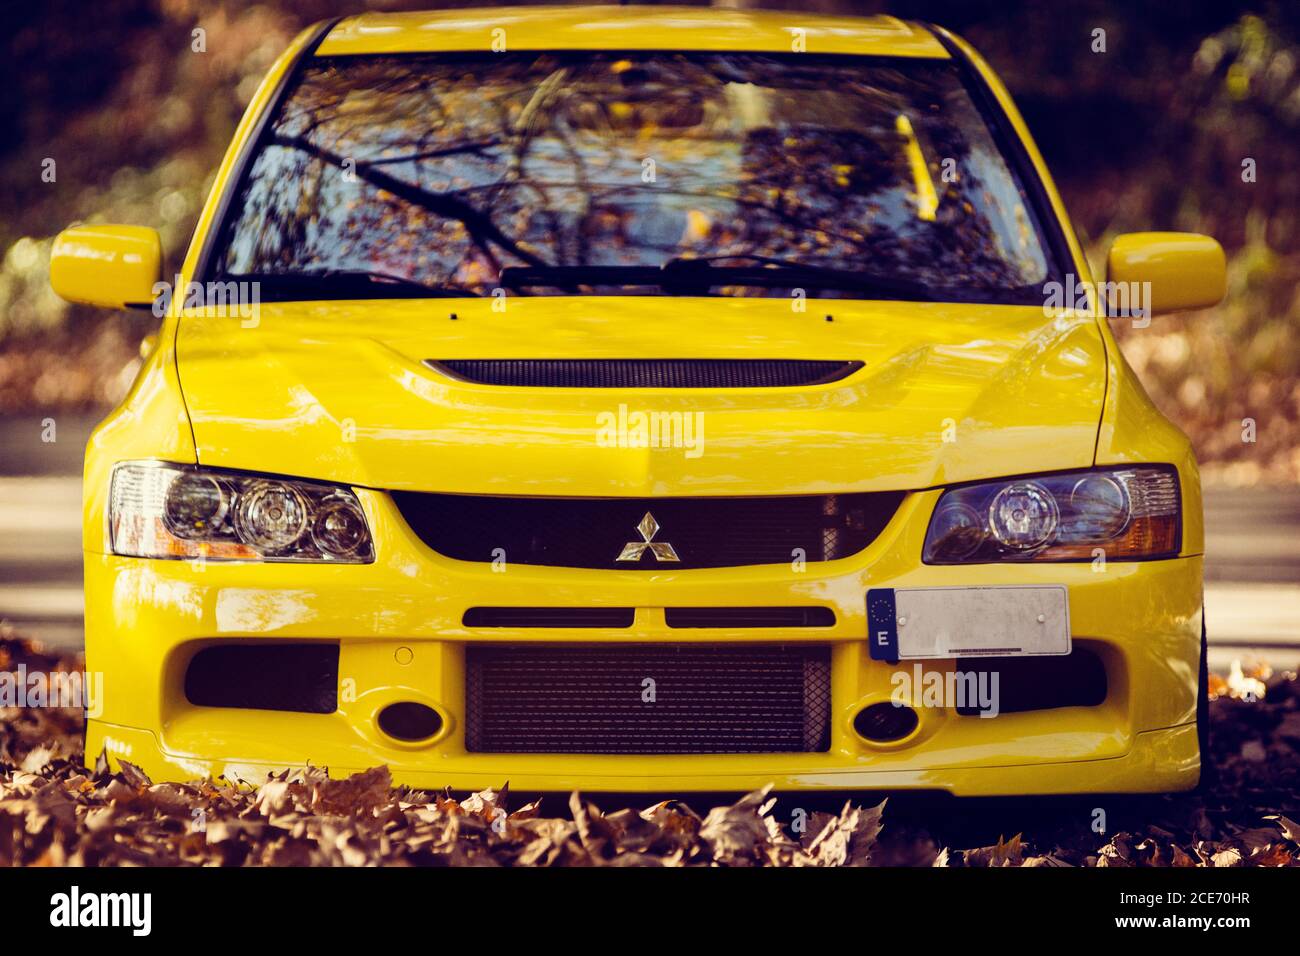 Mitsubishi Lancer Evolution 9 Shot In A Mountain Road Full Of Autumn Leaves Stock Photo Alamy